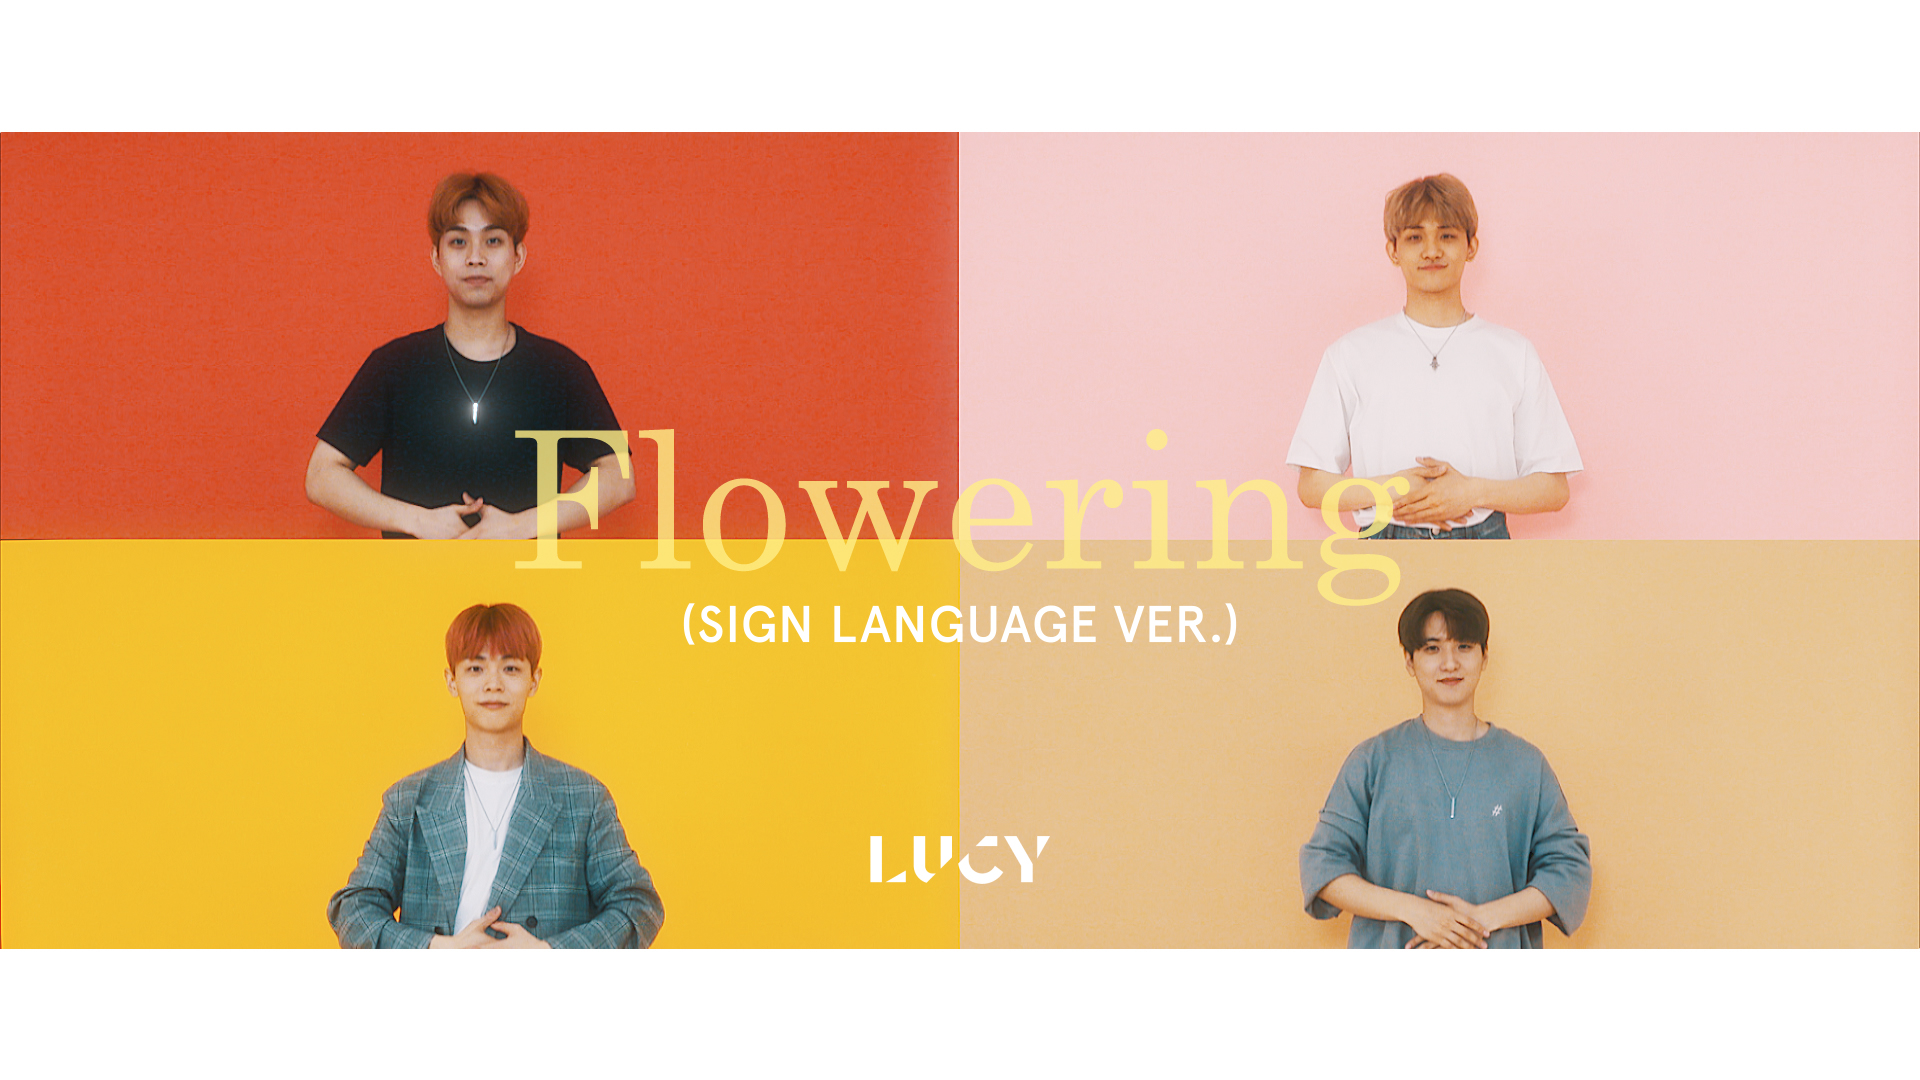 LUCY LIVE CLIP : 개화(Flowering) sign language ver.